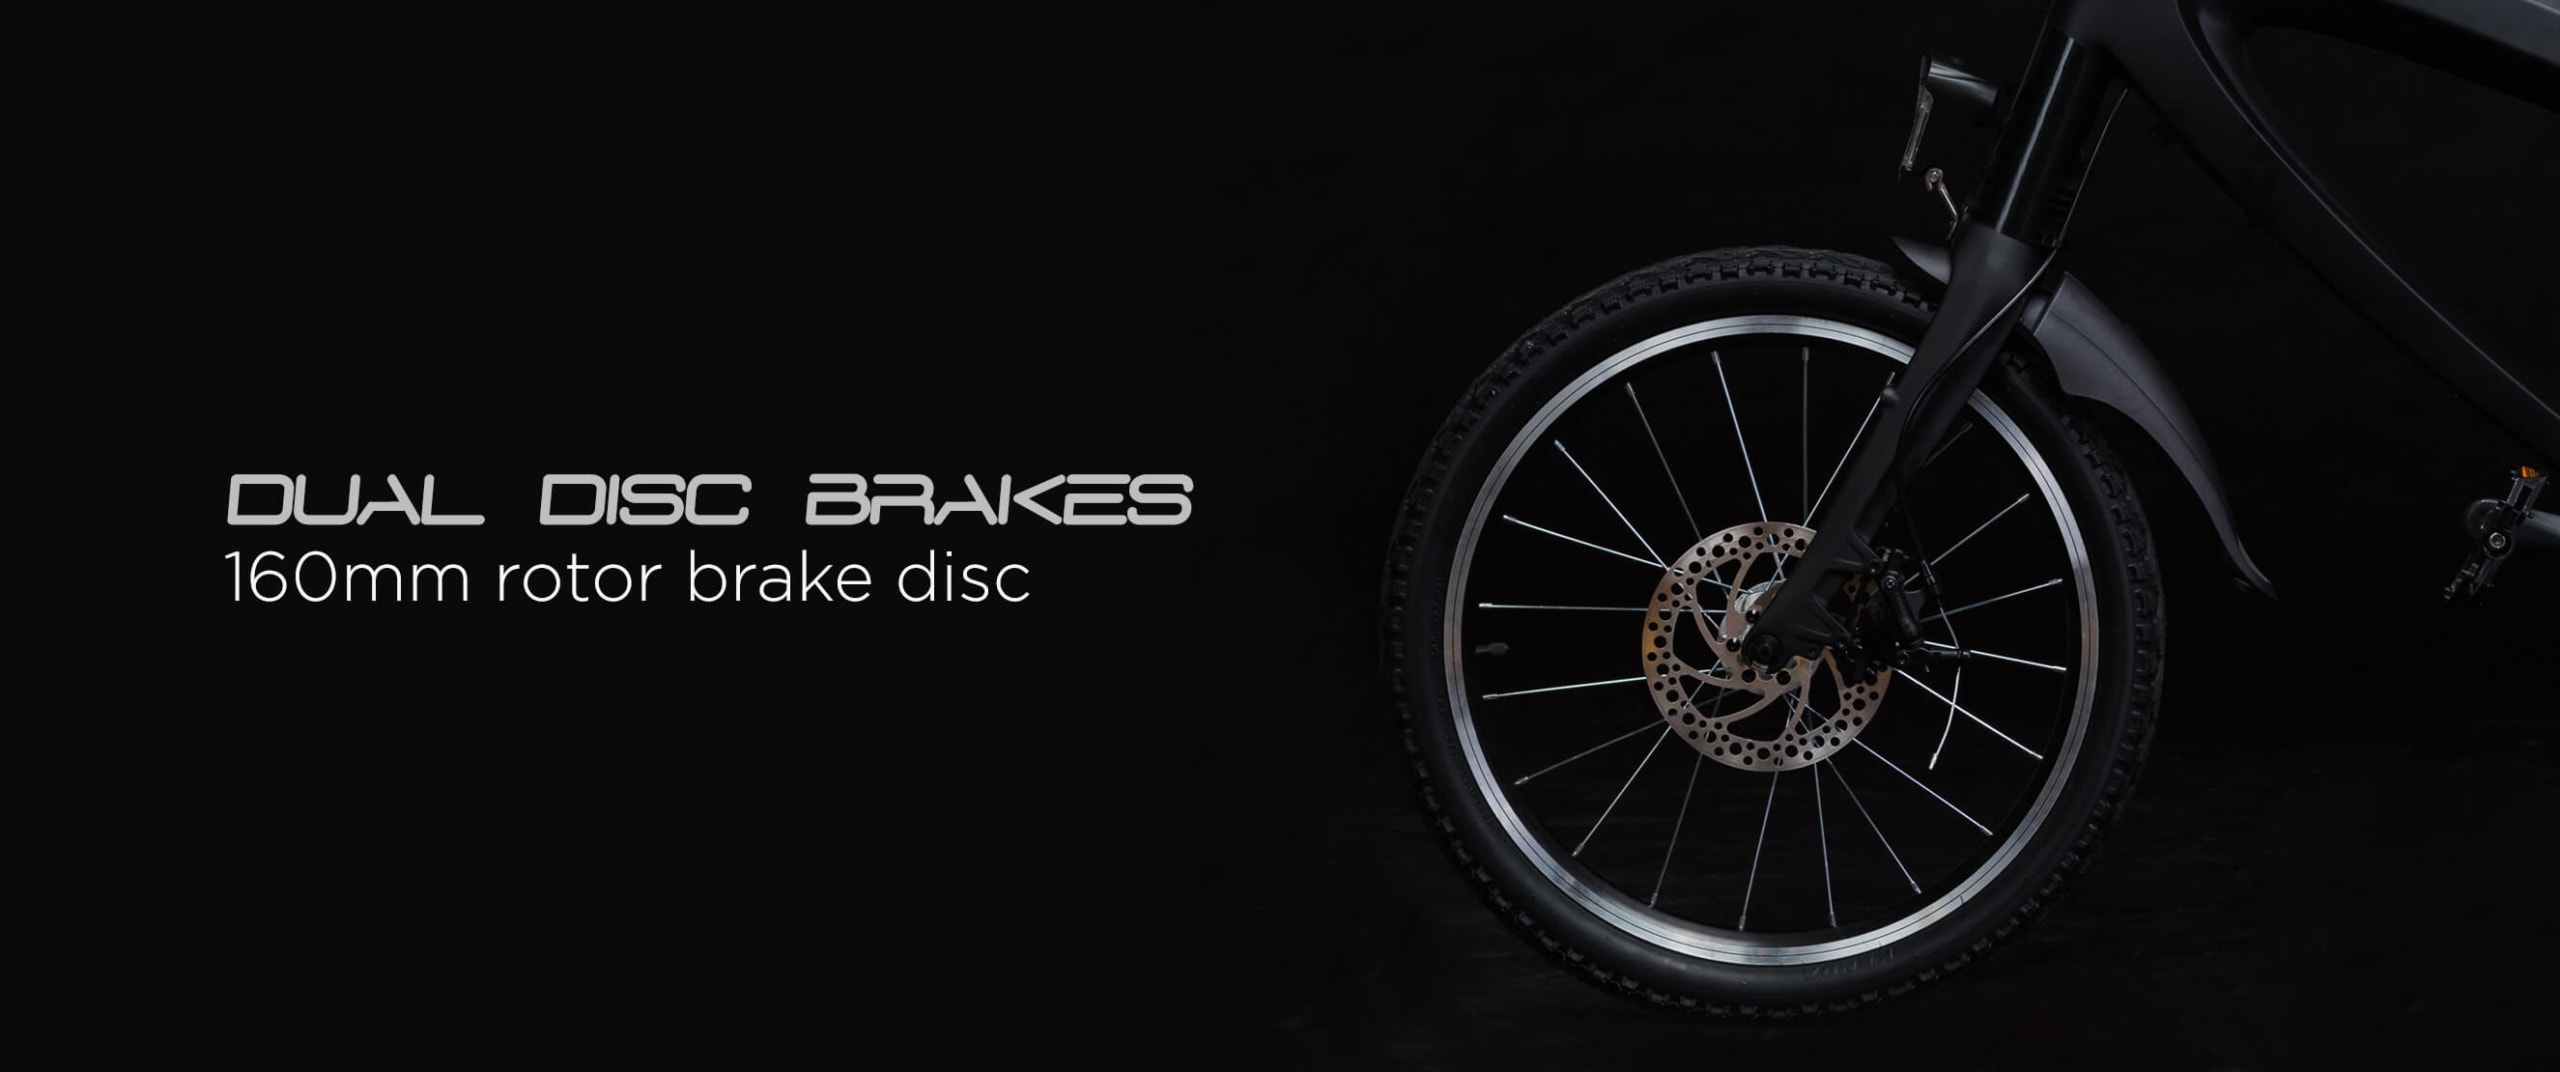 OVO LTA approved electric bicycle dual disc brakes